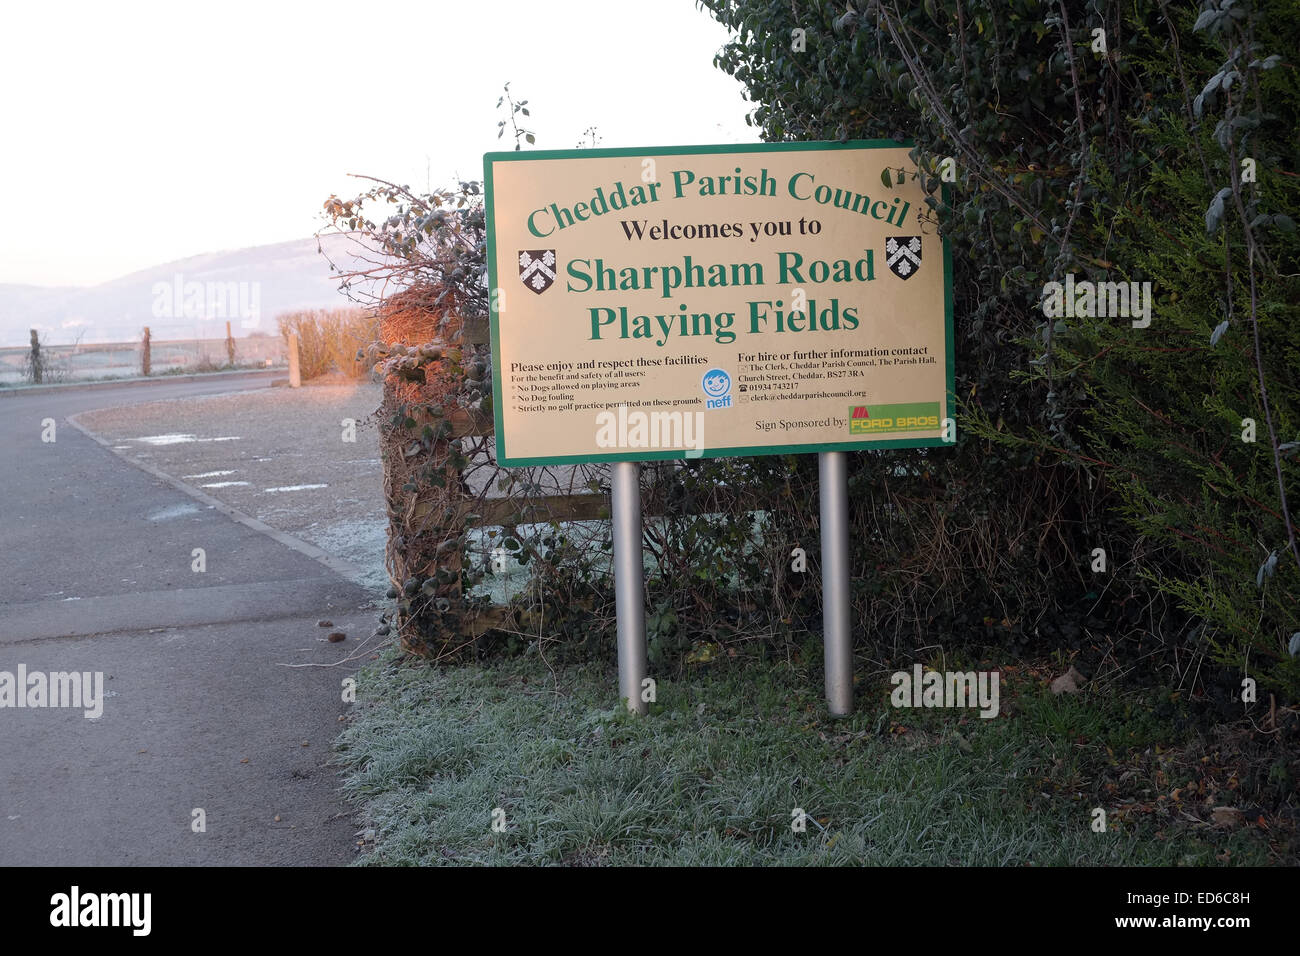 Cheddar Parish Council sign for Sharpham road playing fields. Stock Photo